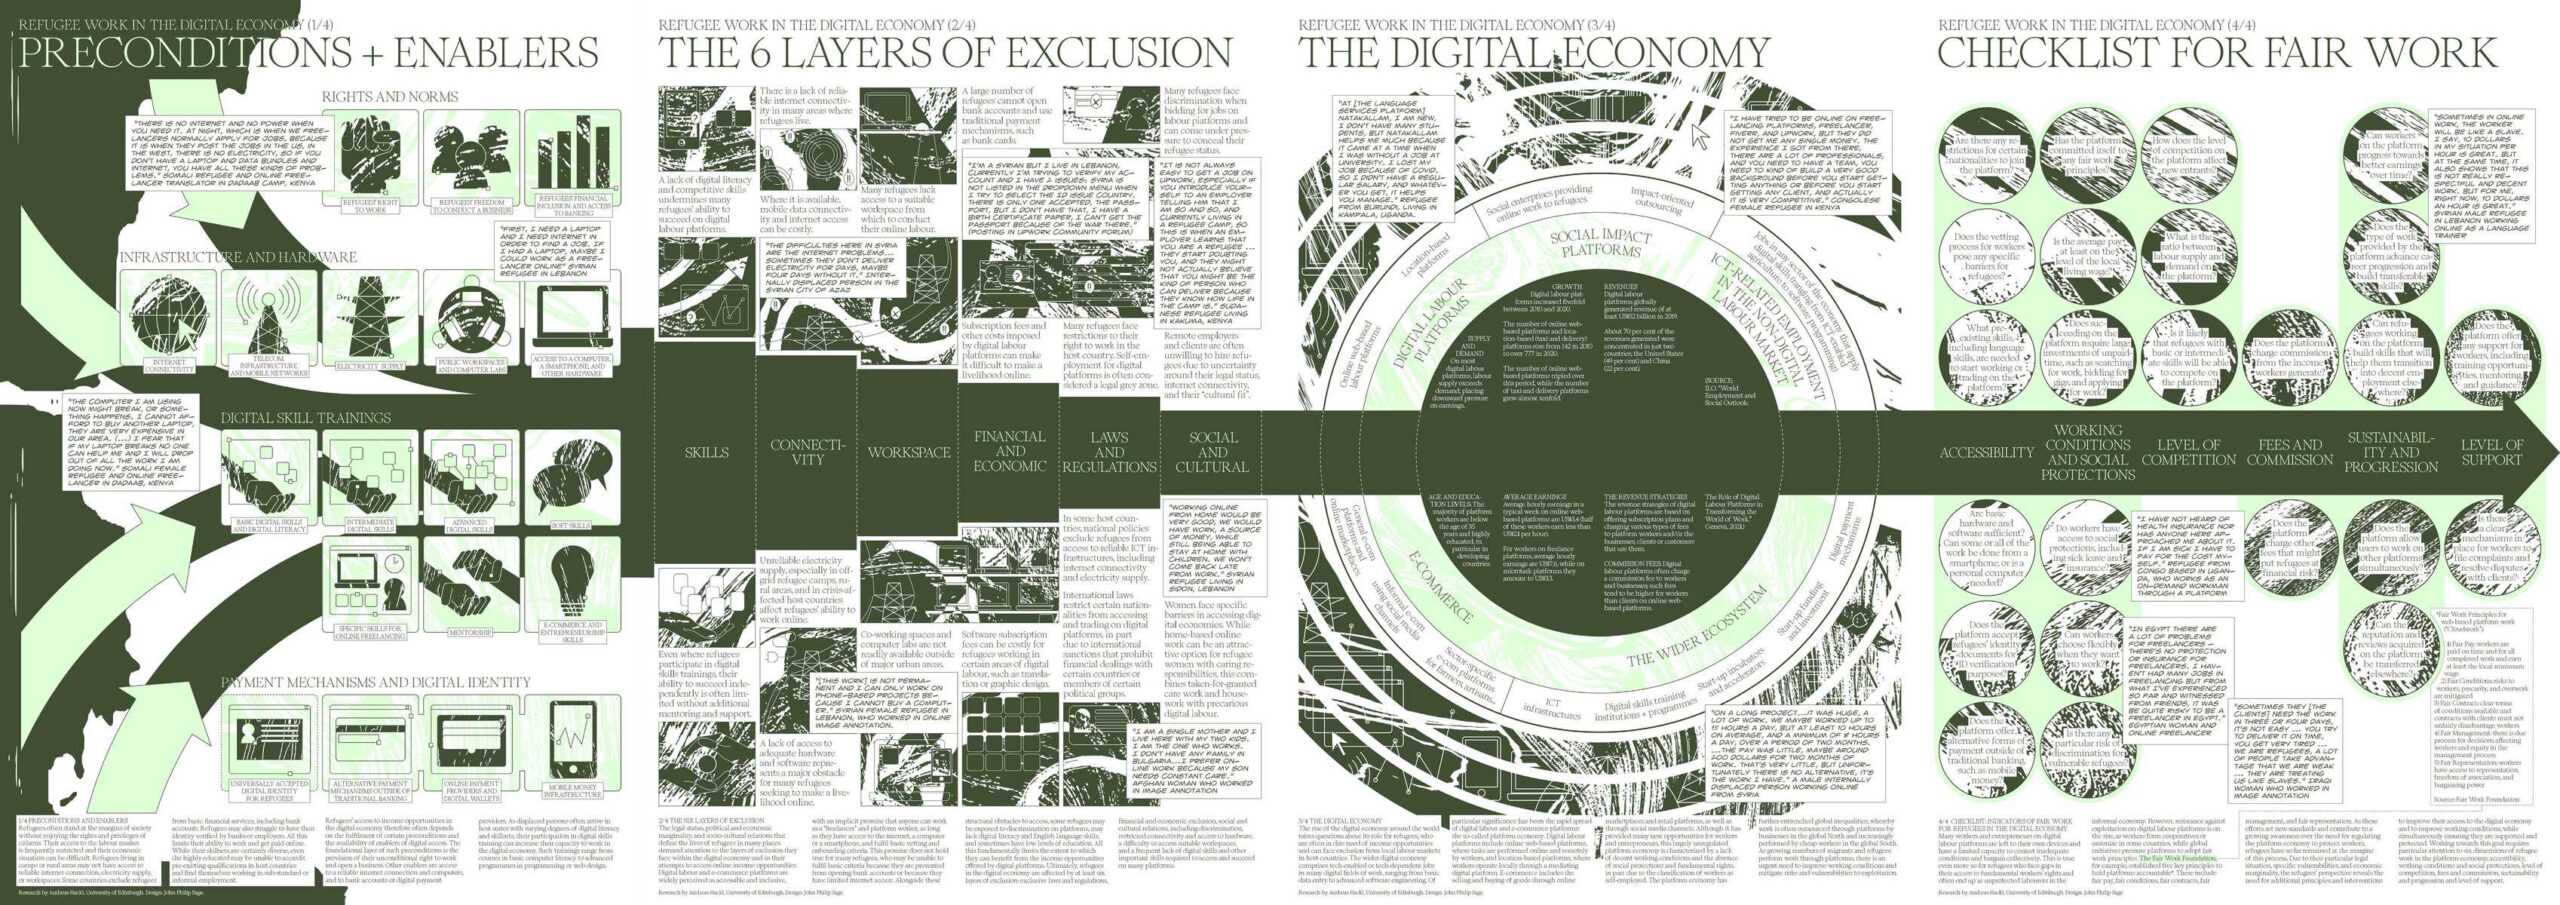 An infographic displaying multiple sections titled "Preconditions + Enablers," "The 6 Layers of Exclusion," "The Digital Economy," and "Checklist for Fair Work." Each section contains text, charts, and diagrams, with the dominant colors being white and green.